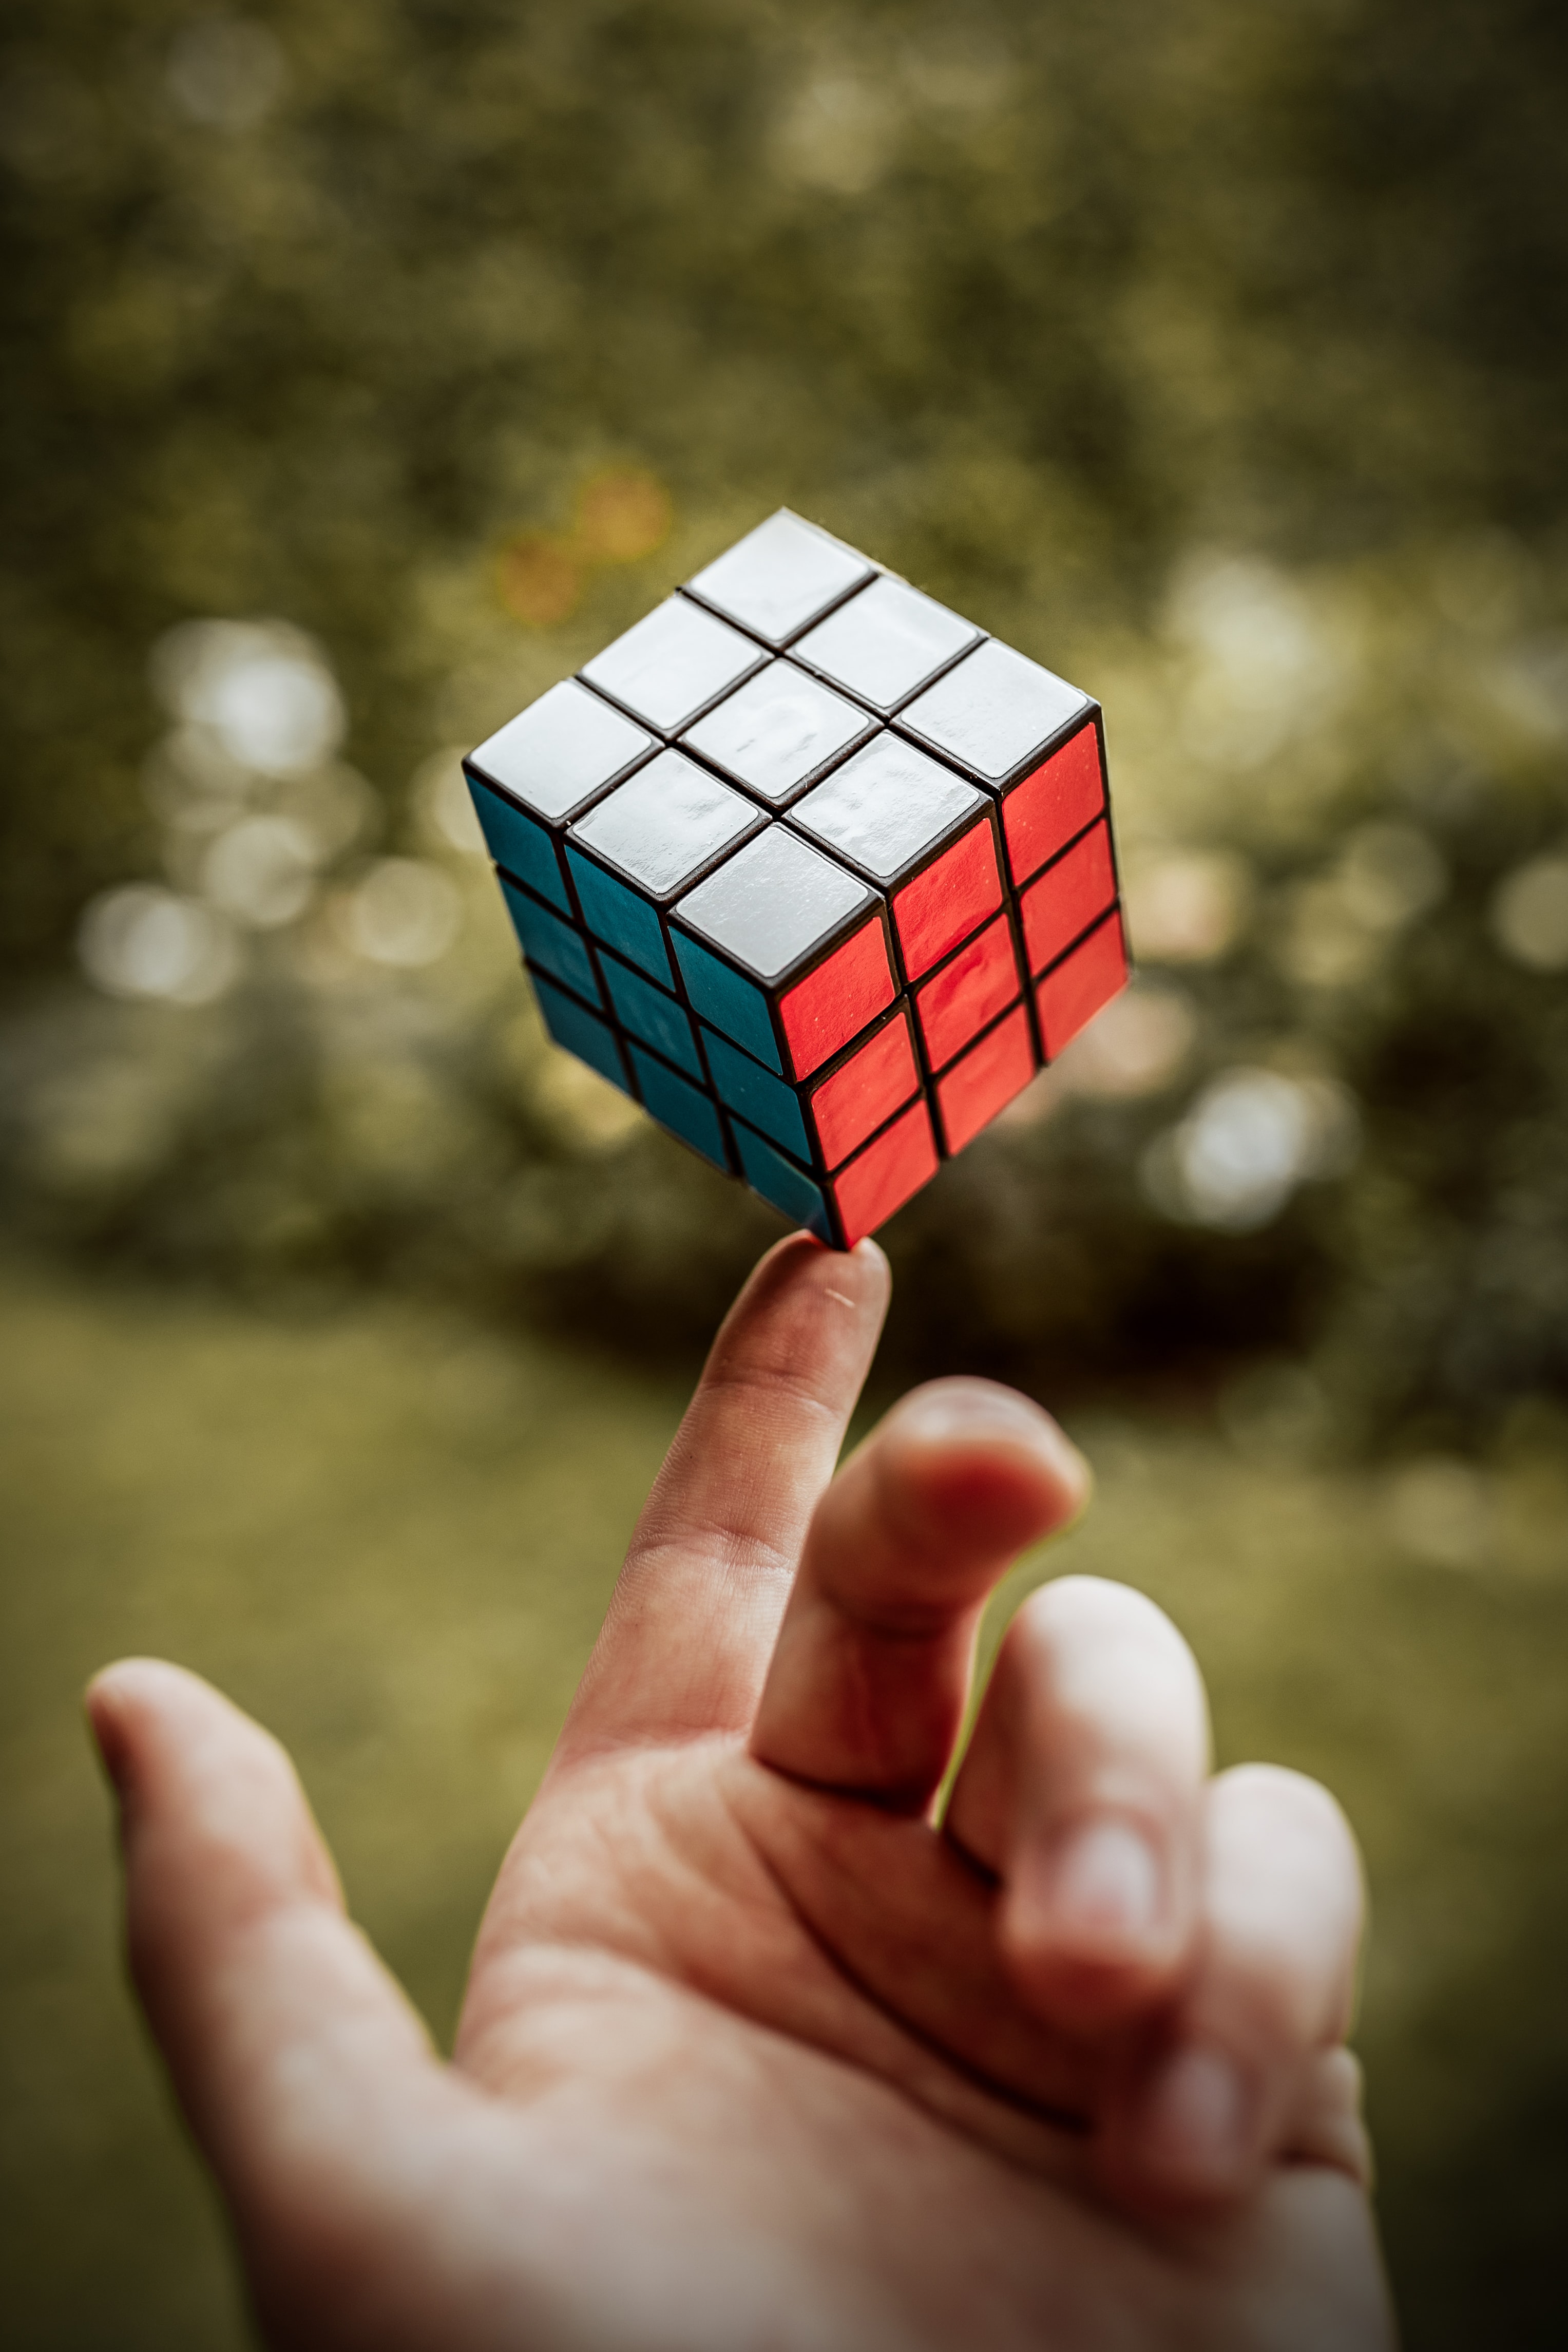 rubik's cube, miscellaneous, hand, miscellanea, fingers, touch, touching